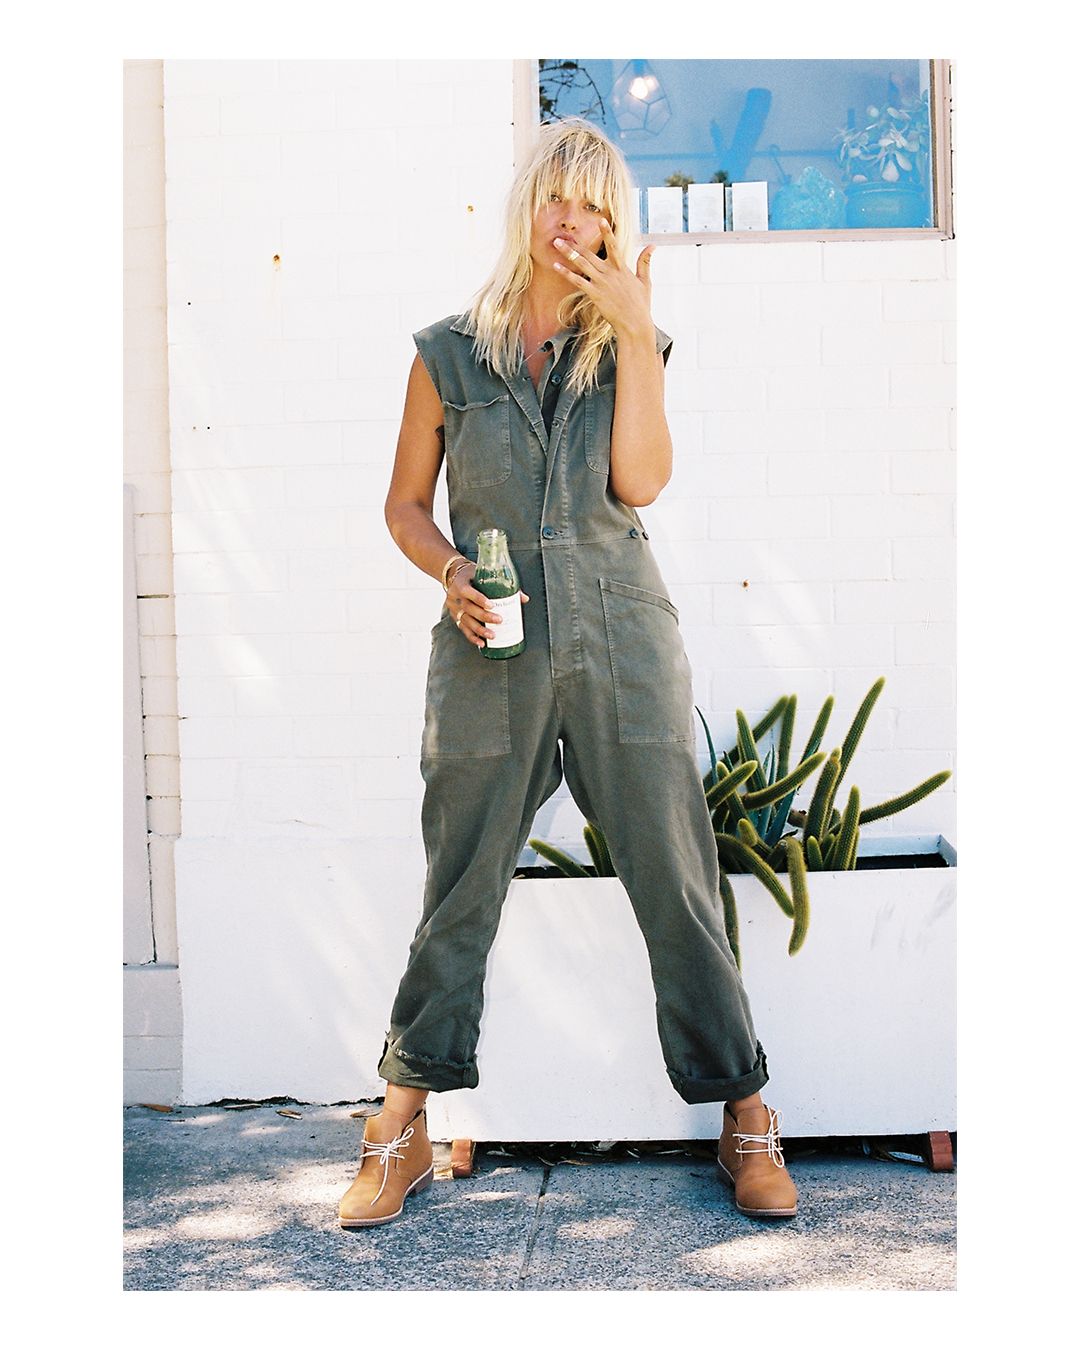 Bared_Footwear_Womens_Collaboration_Anna_Feller_Tan_Leather_Nuthatch_Desert_Boots_Green_Pant_Suit